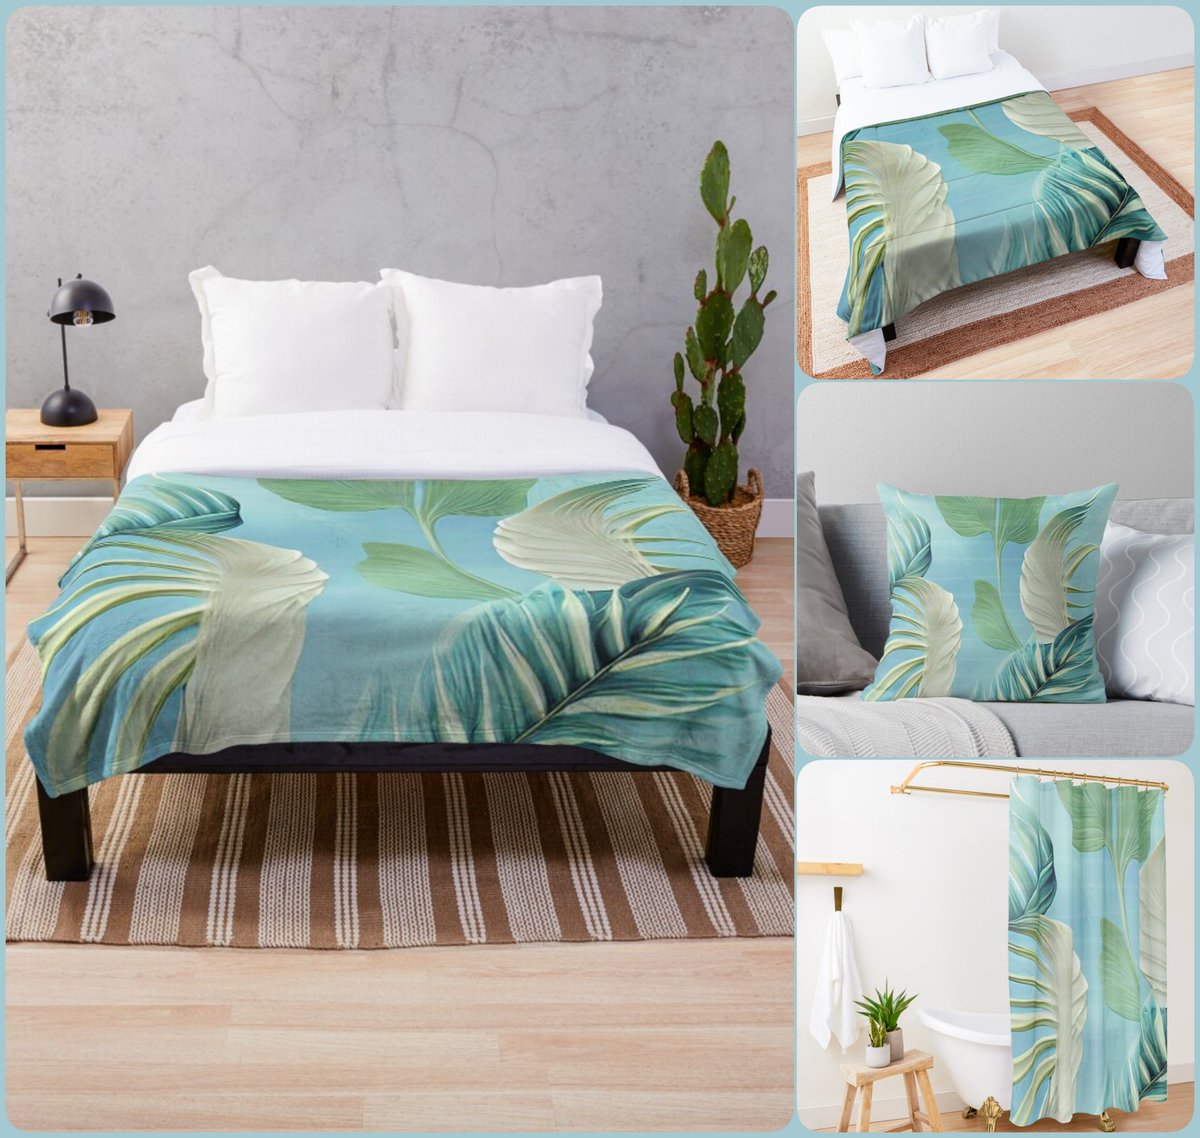 Botanical Paradise Throw Blanket~by Art Falaxy ~Charming Decor~ #accents #homedecor #art #artfalaxy #bathmats #blankets #comforters #duvets #pillows #redbubble #shower #trendy #modern #gifts #FindYourThing #blue #green #yellow redbubble.com/i/throw-blanke…